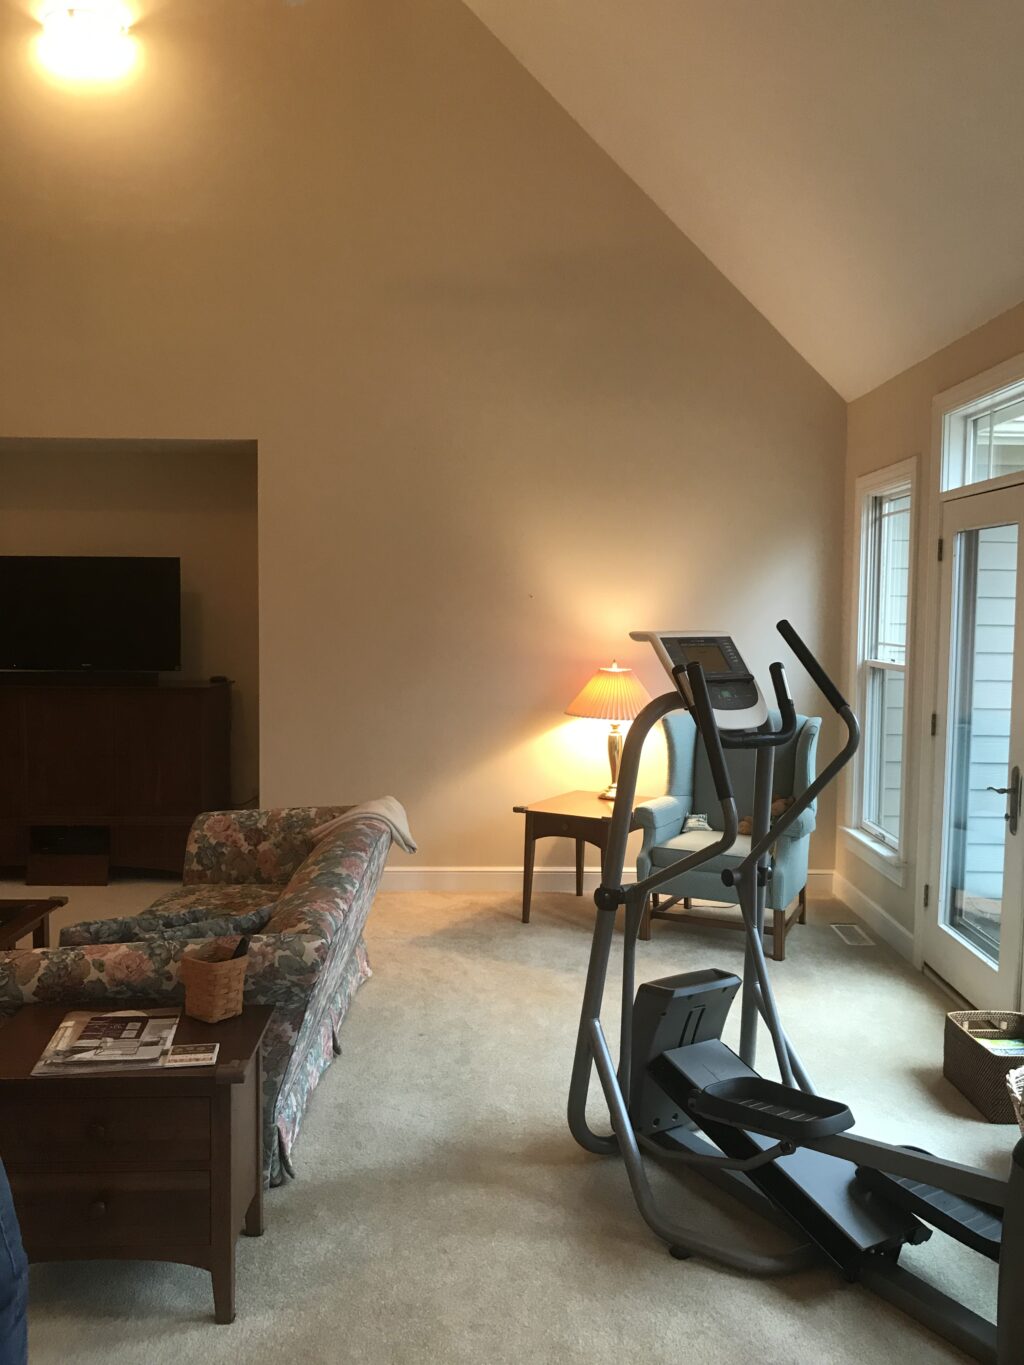 Living room with couch, arm chair, and exercise stepper